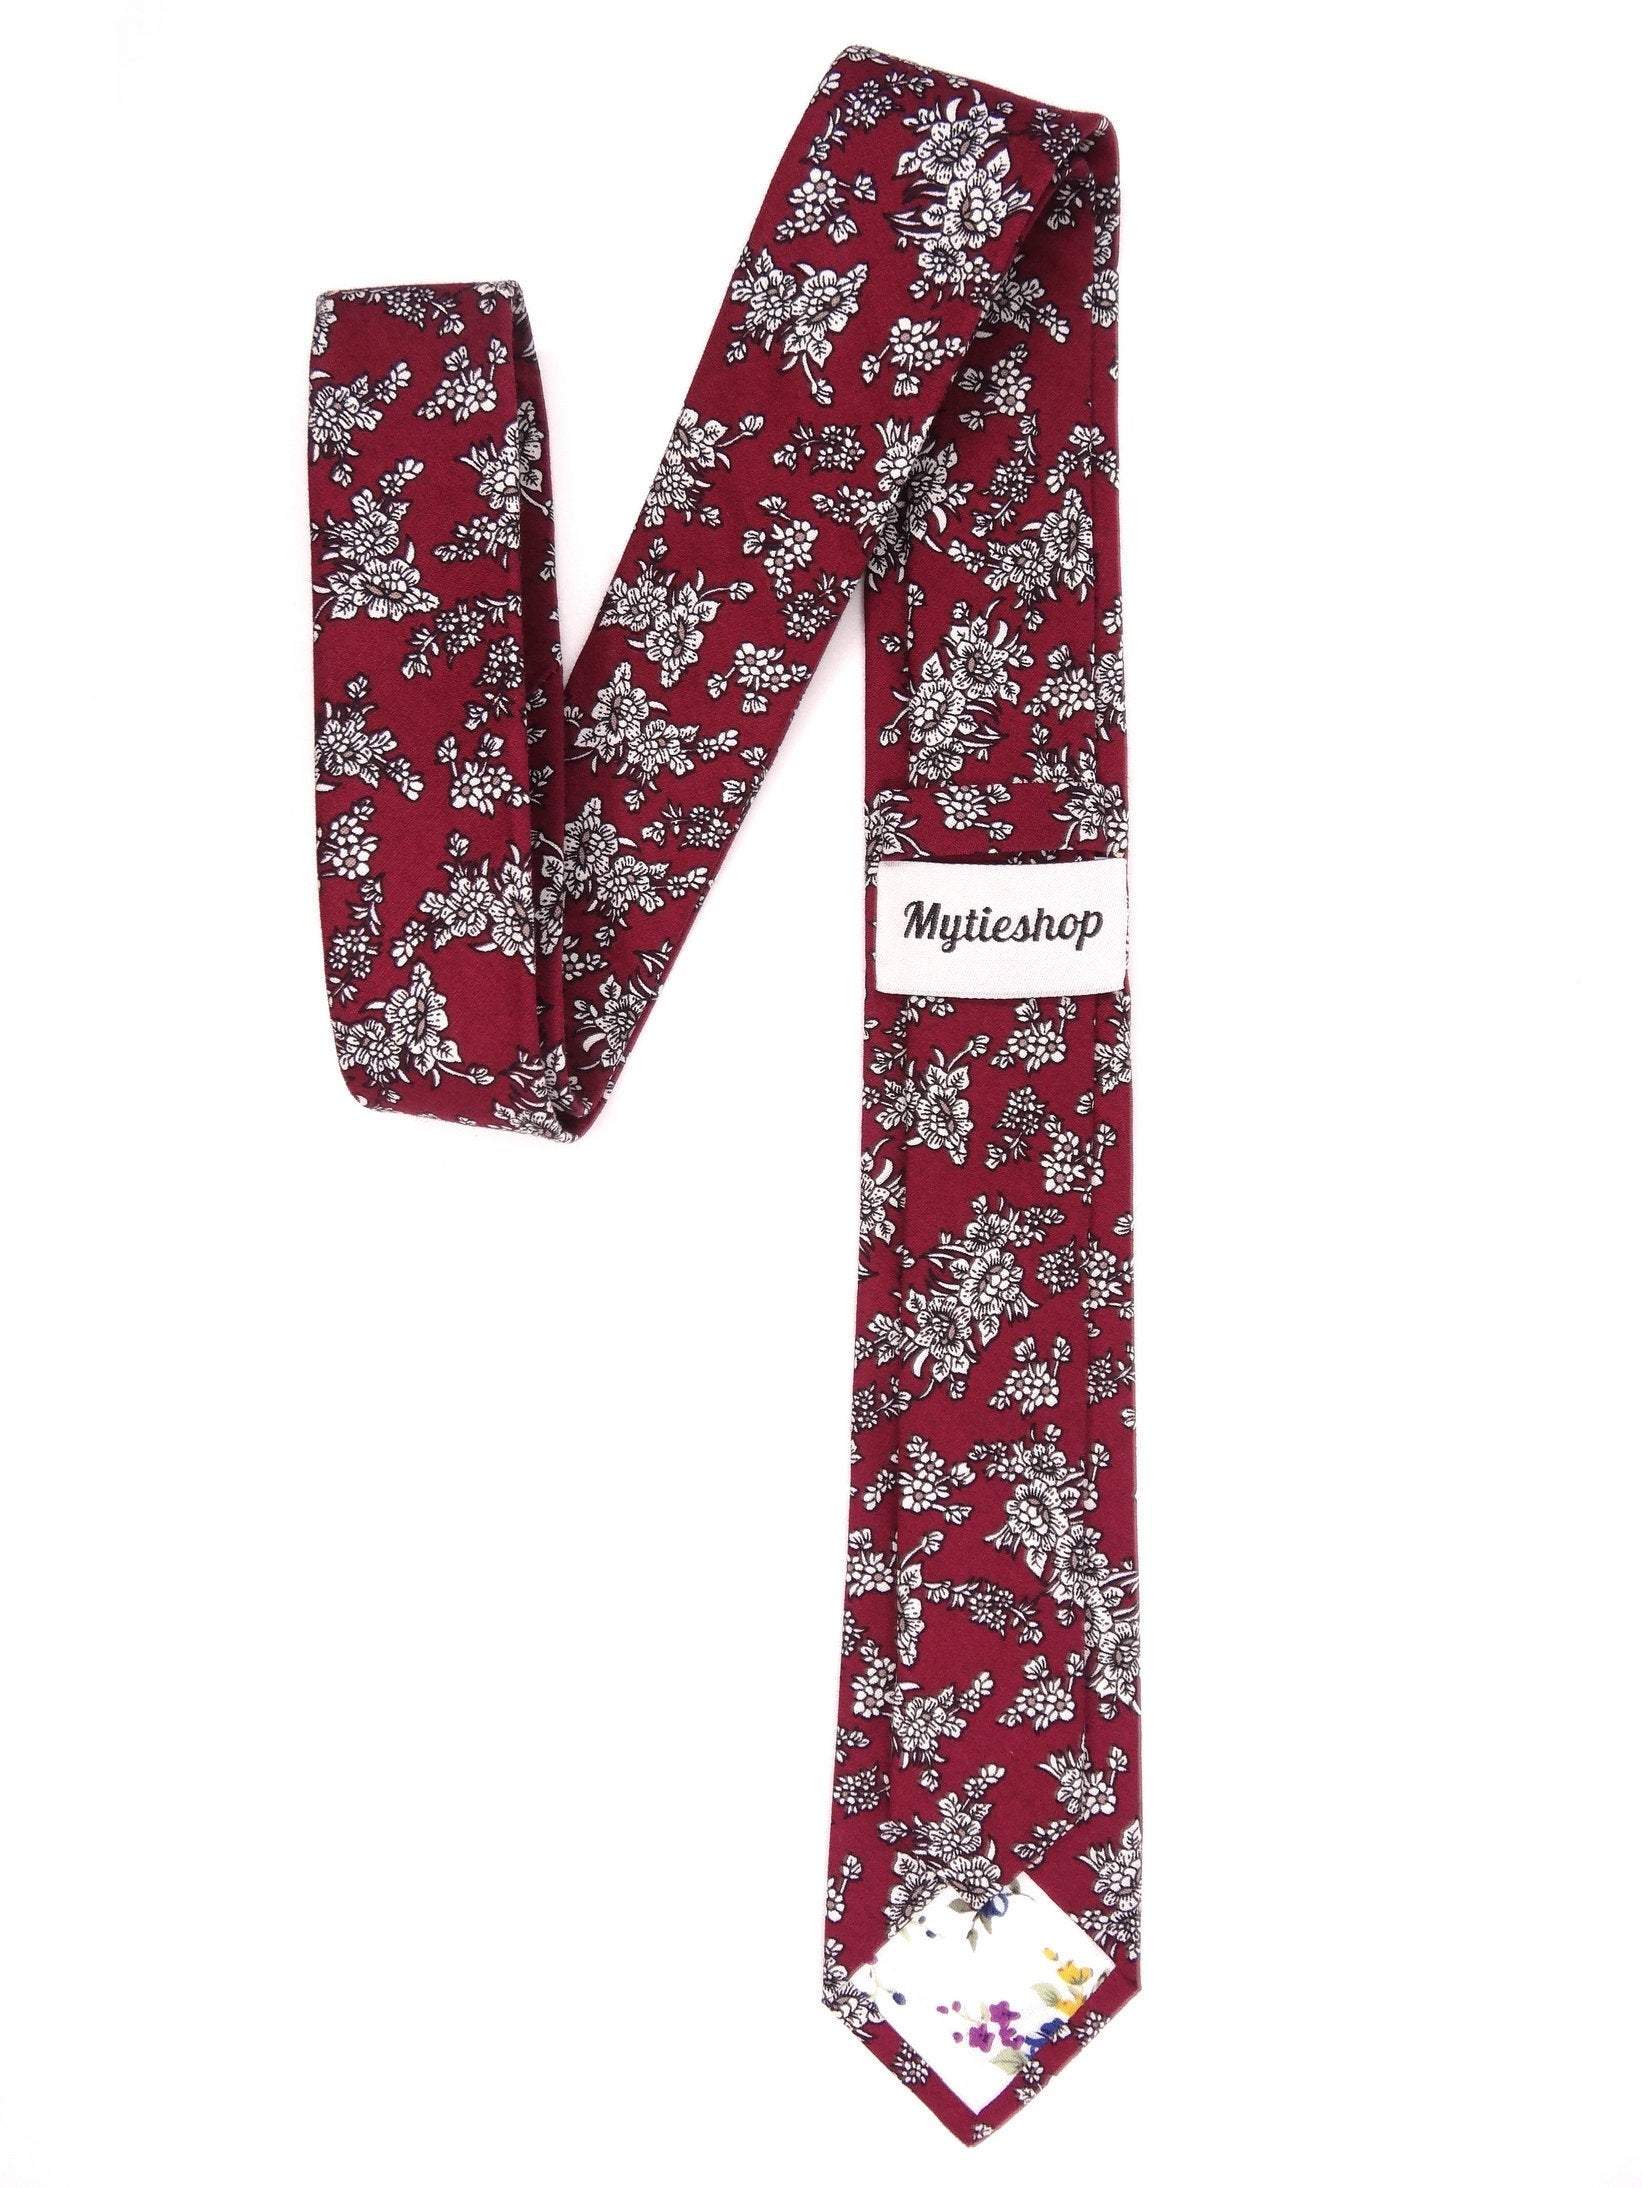 Maroon Floral Tie 2.36&quot; PRESTON MYTIESHOP-Neckties-Maroon Floral TieFloral skinny tie for anniversaries weddings prom and other events. Flower-Mytieshop. Skinny ties for weddings anniversaries. Father of bride. Groomsmen. Cool skinny neckties for men. Neckwear for prom, missions and fancy events. Gift ideas for men. Anniversaries ideas. Wedding aesthetics. Flower ties. Dry flower ties.